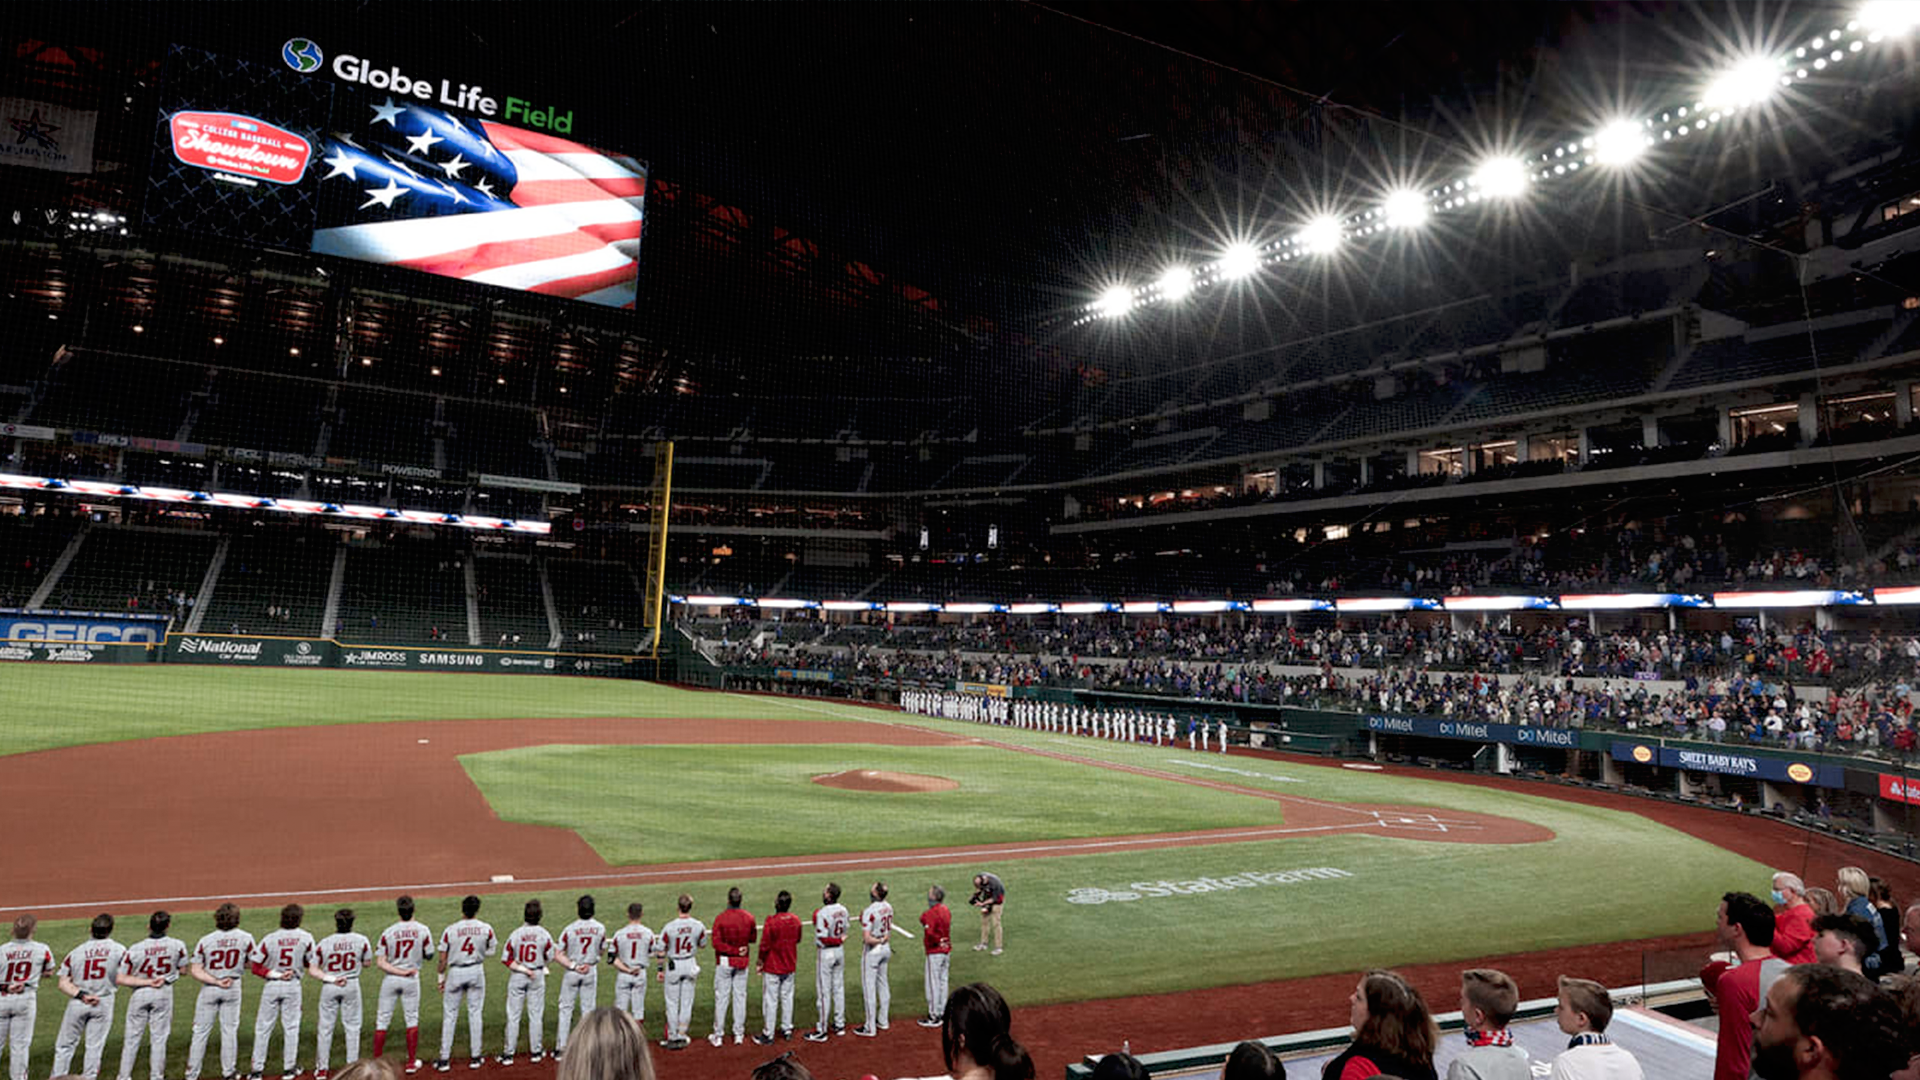 Texas Rangers host first North American sporting event without attendance  restrictions since start of COVID-19 pandemic, Baseball News